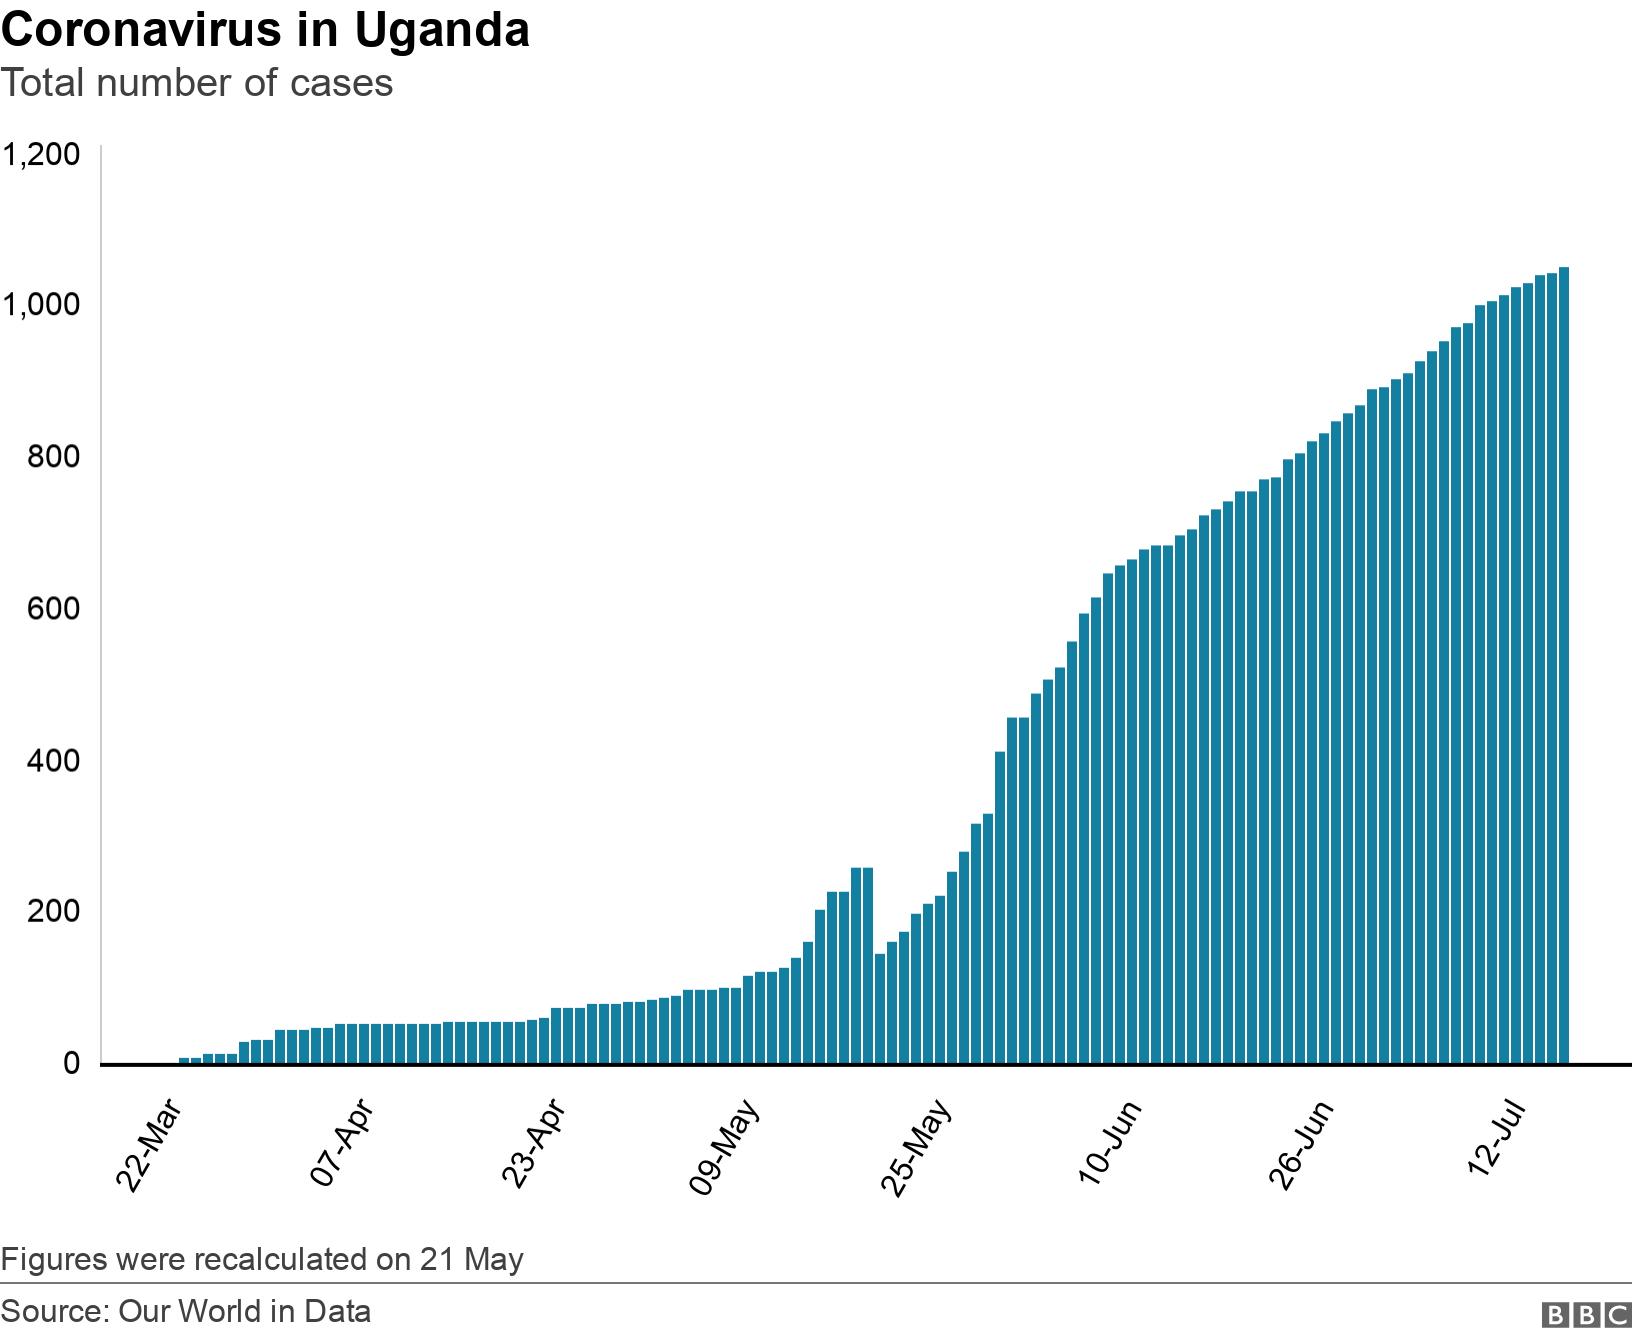 Coronavirus in Uganda. Total number of cases. Total number of coronvirus cases in Uganda Figures were recalculated on 21 May.